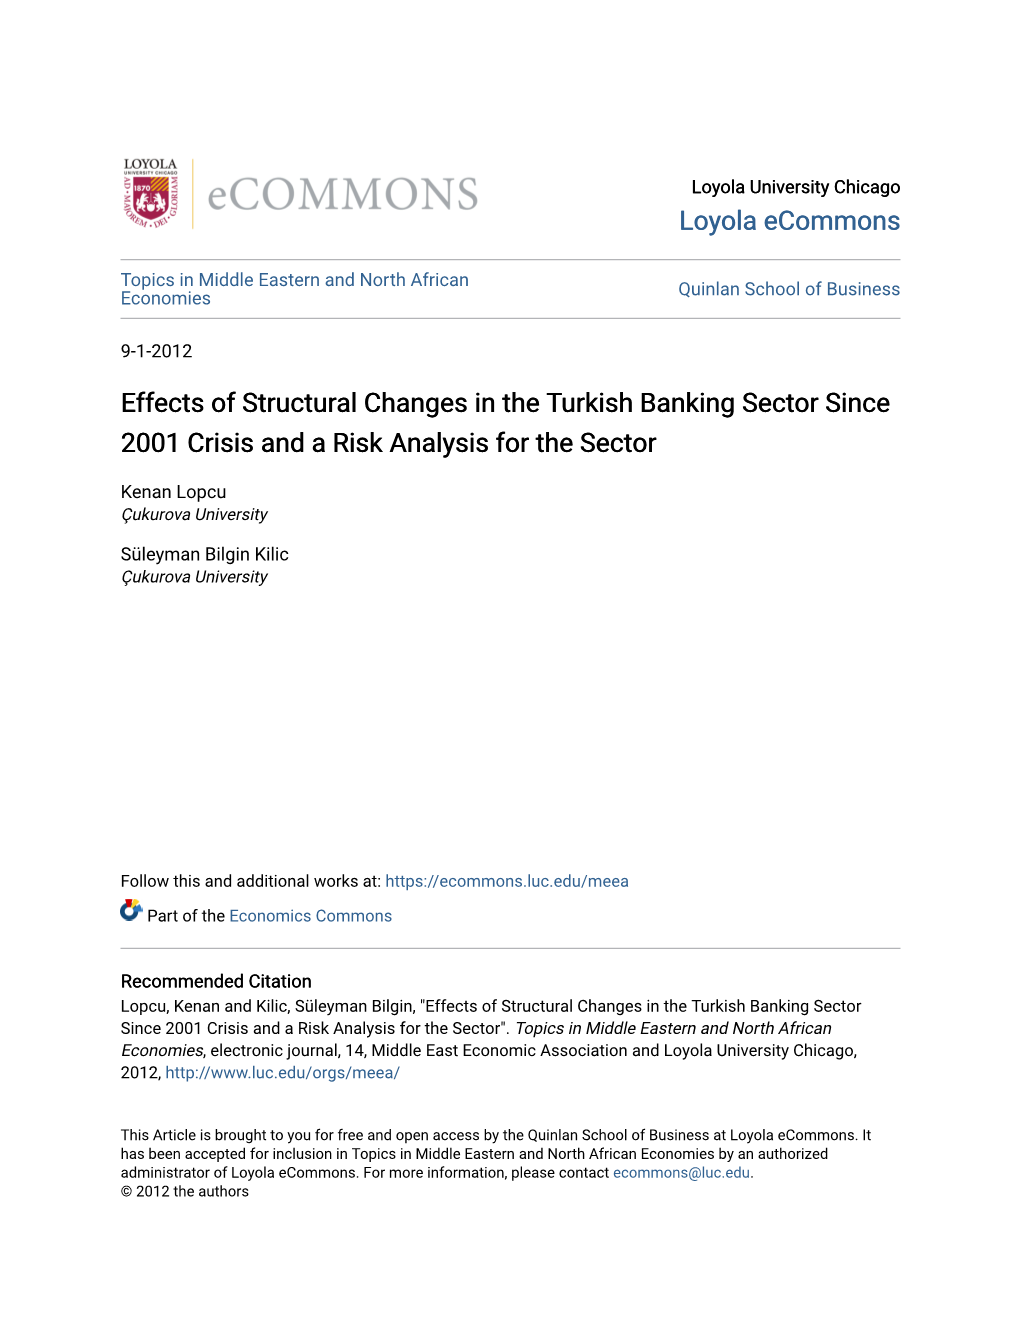 Effects of Structural Changes in the Turkish Banking Sector Since 2001 Crisis and a Risk Analysis for the Sector